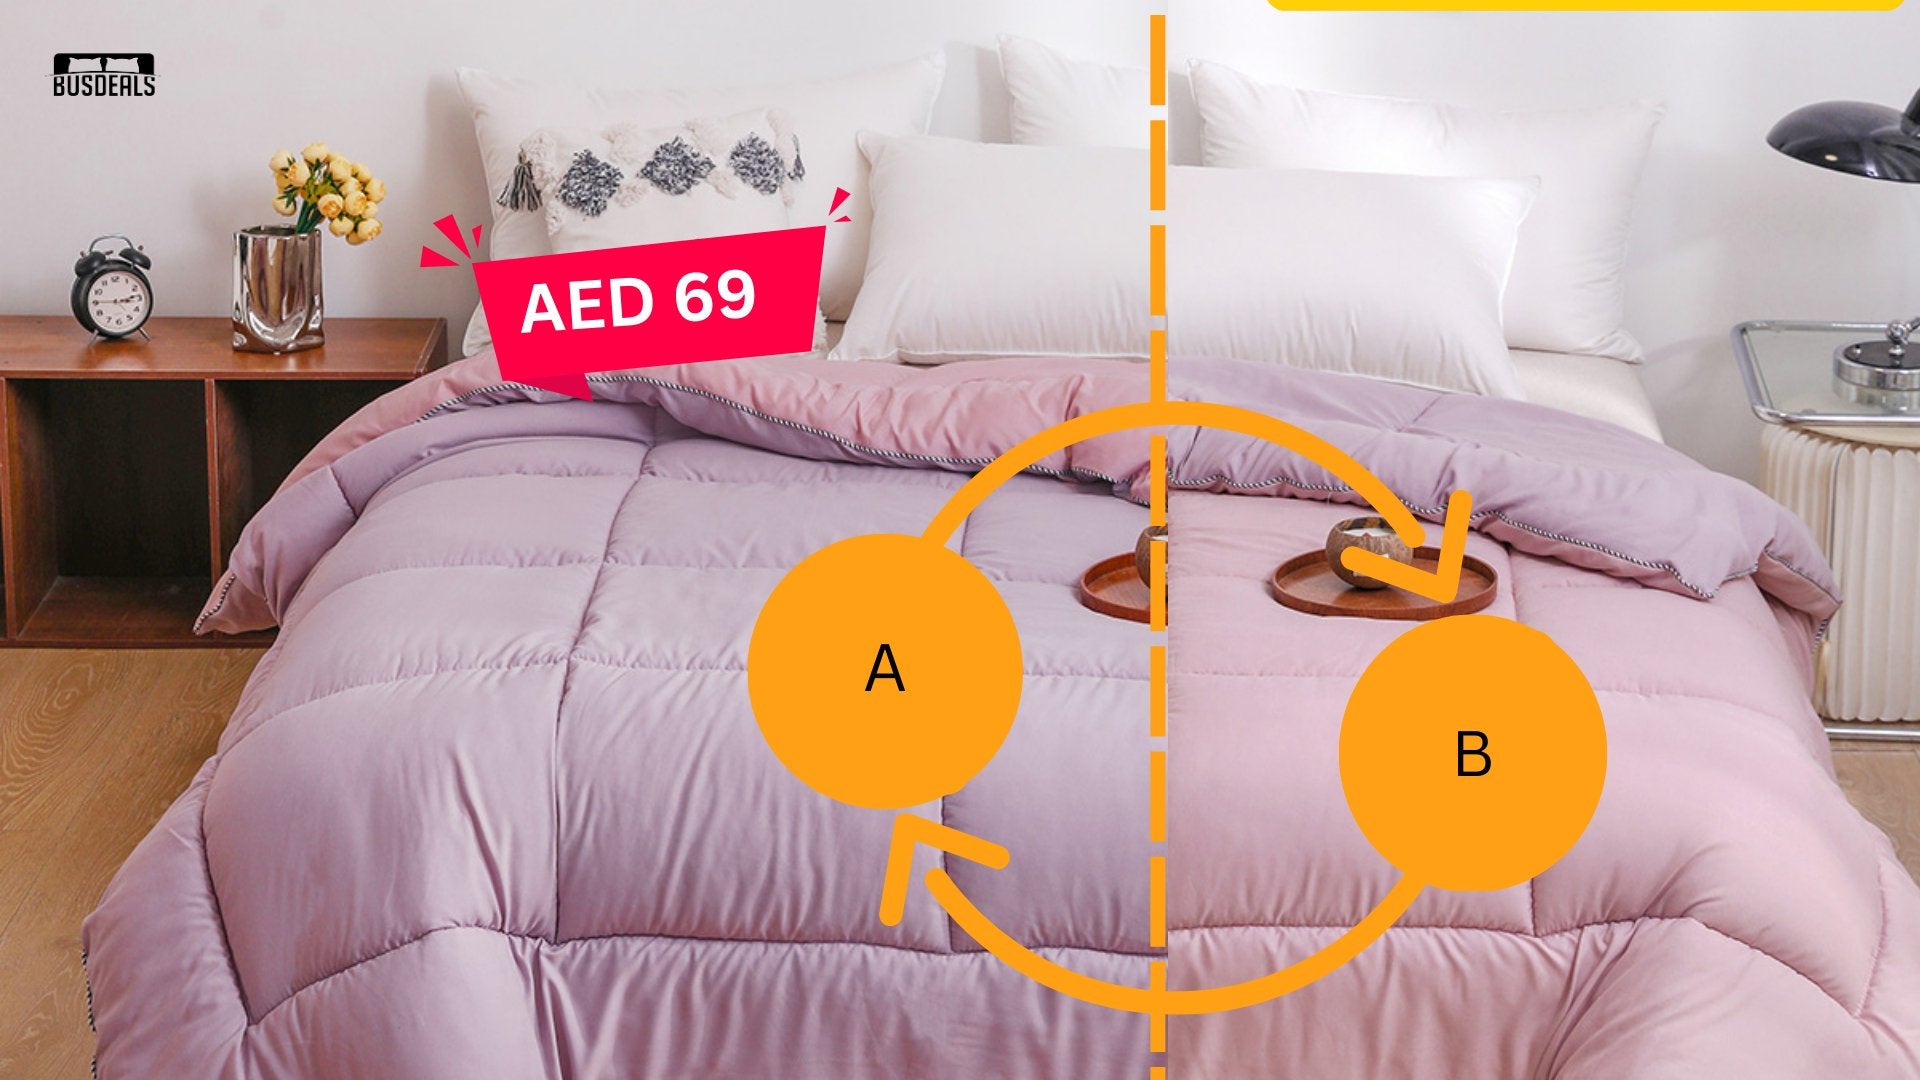 Upgrade Your Bedding with Duvets Quilts: Get More for Less with SUMMER15 - BusDeals